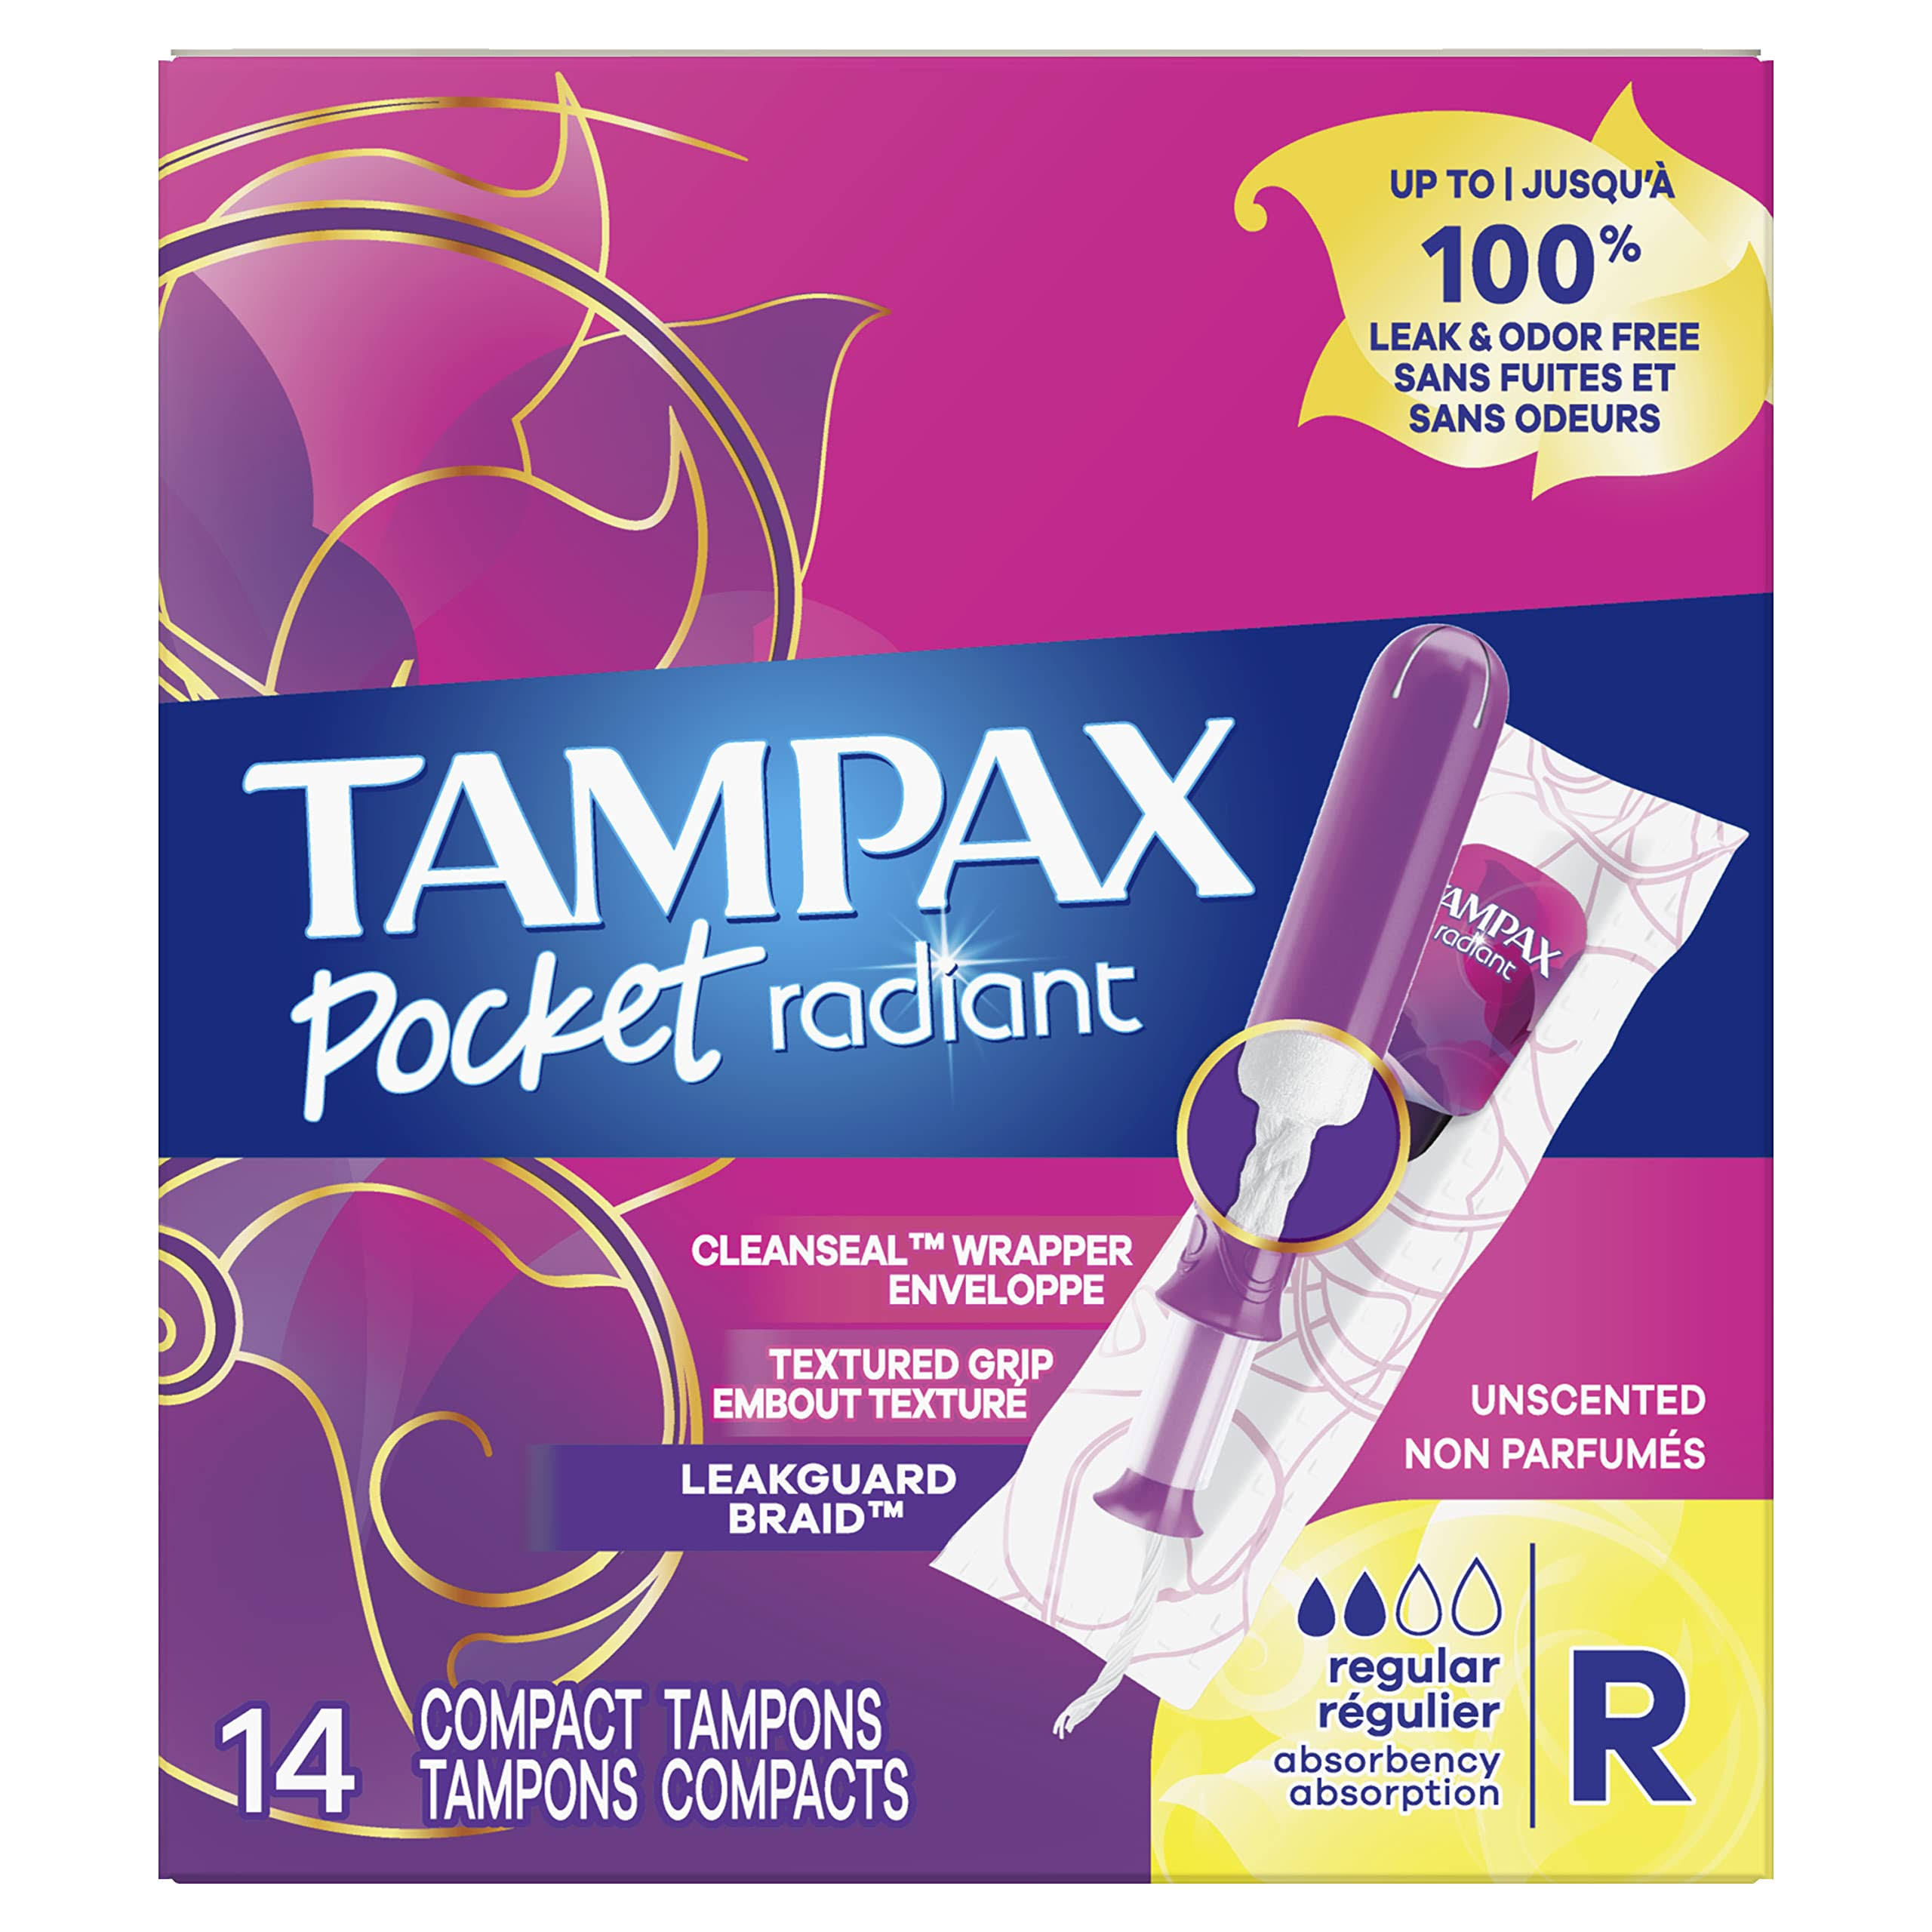 Tampax Pocket Radiant Compact Tampons Regular Absorbency Unscented